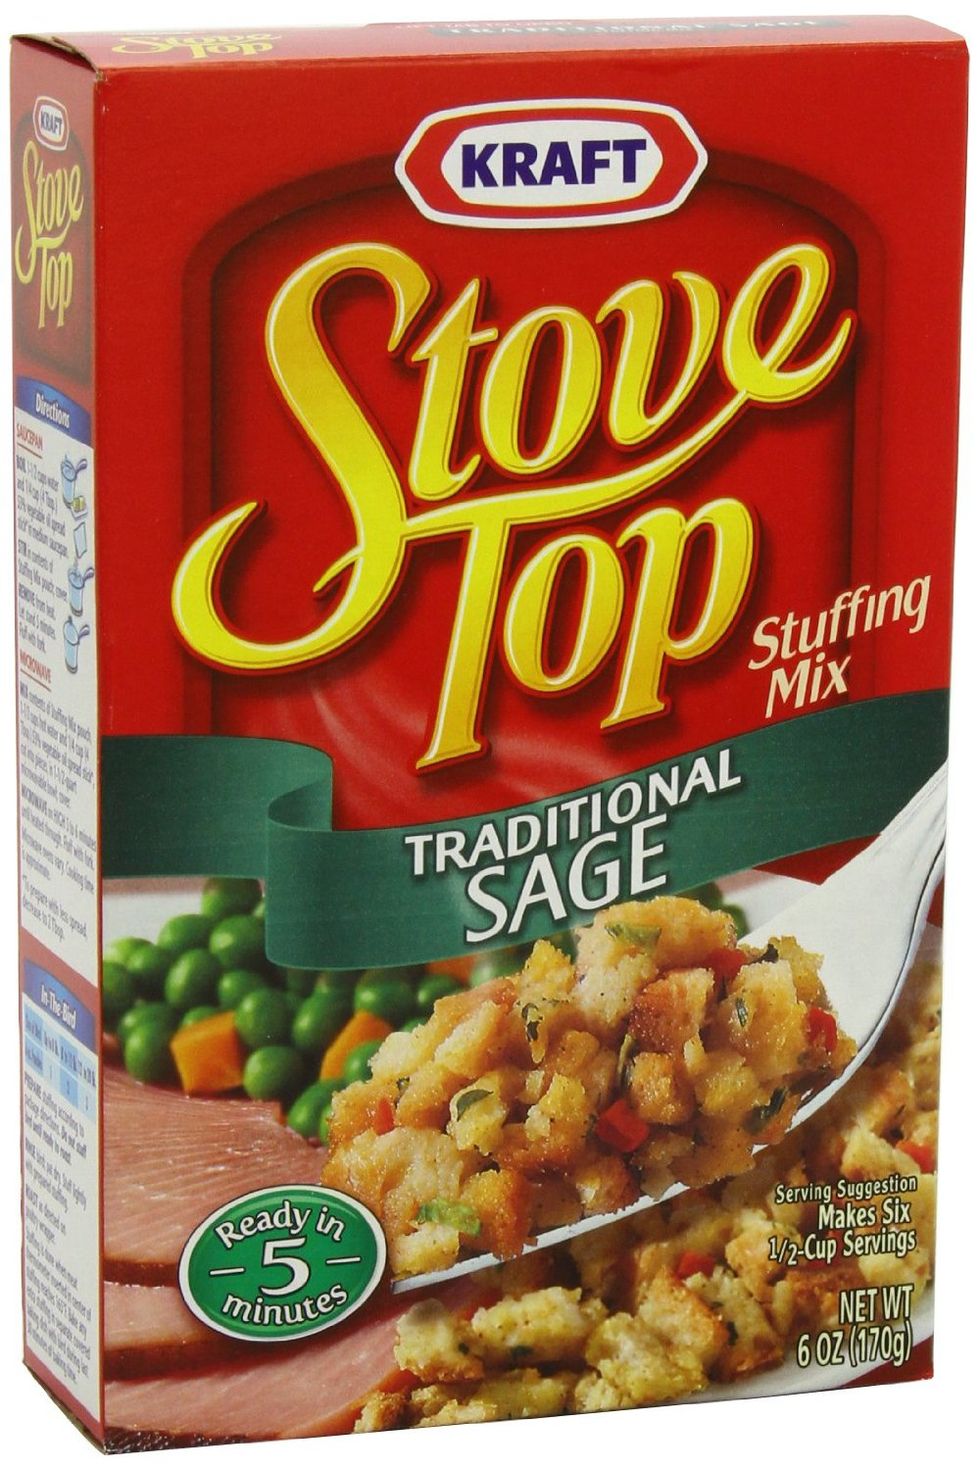 Best Boxed Stuffing Mix - Easy Store Bought Stuffings